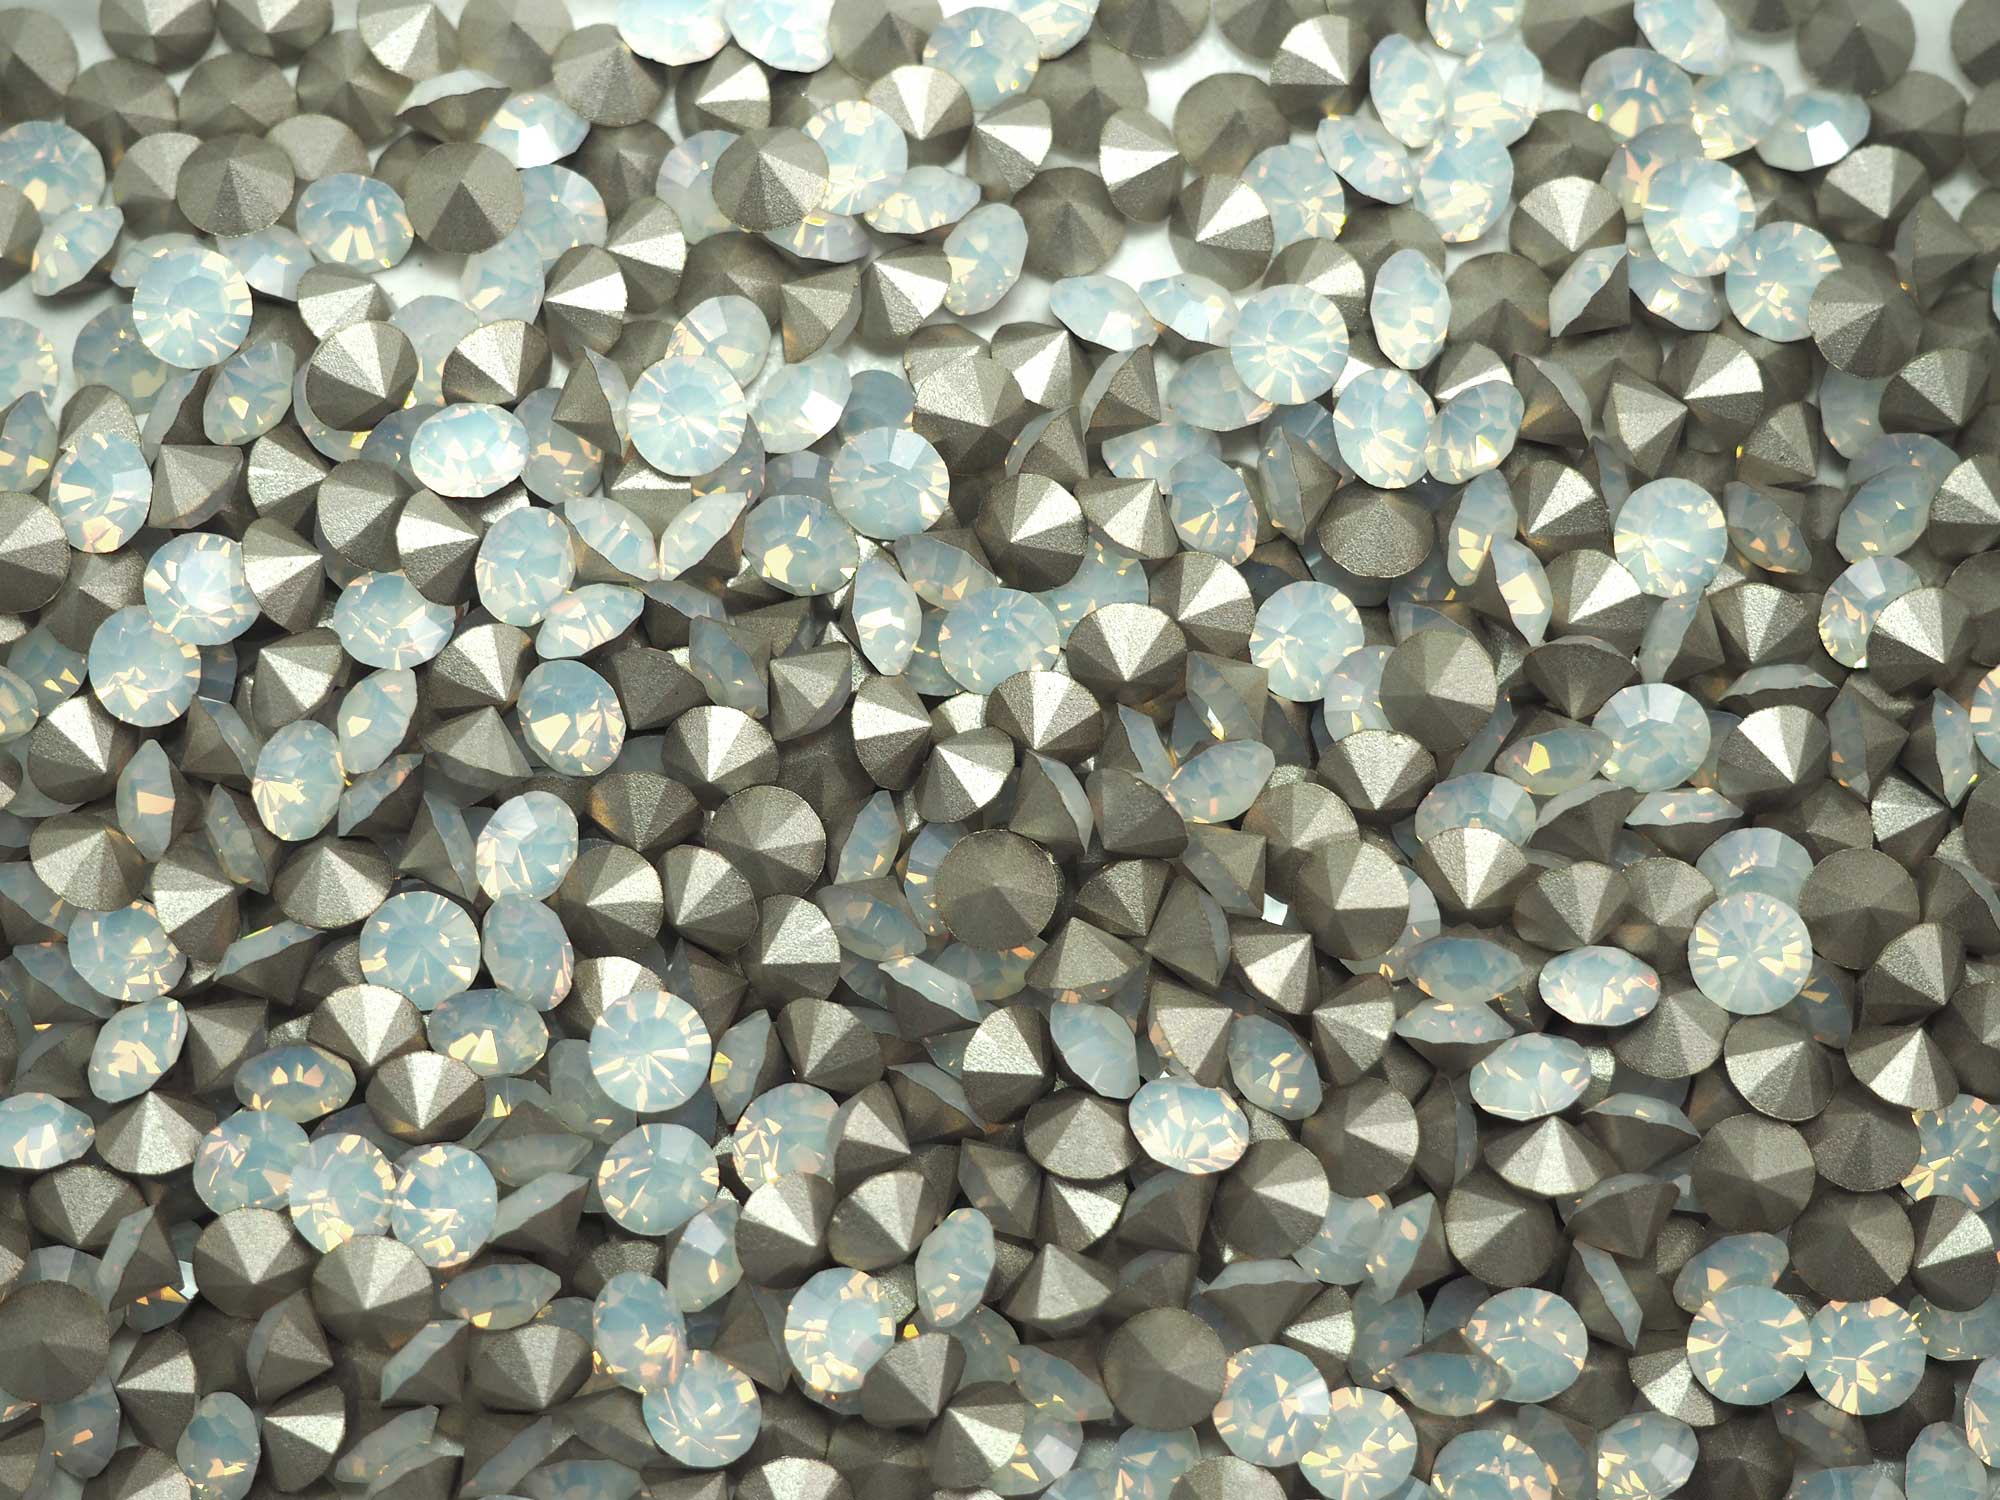 White Opal, Preciosa Genuine Czech MAXIMA Pointed Back Chatons in size ss20 (5mm), 72 pieces, Silver Foiled, P628